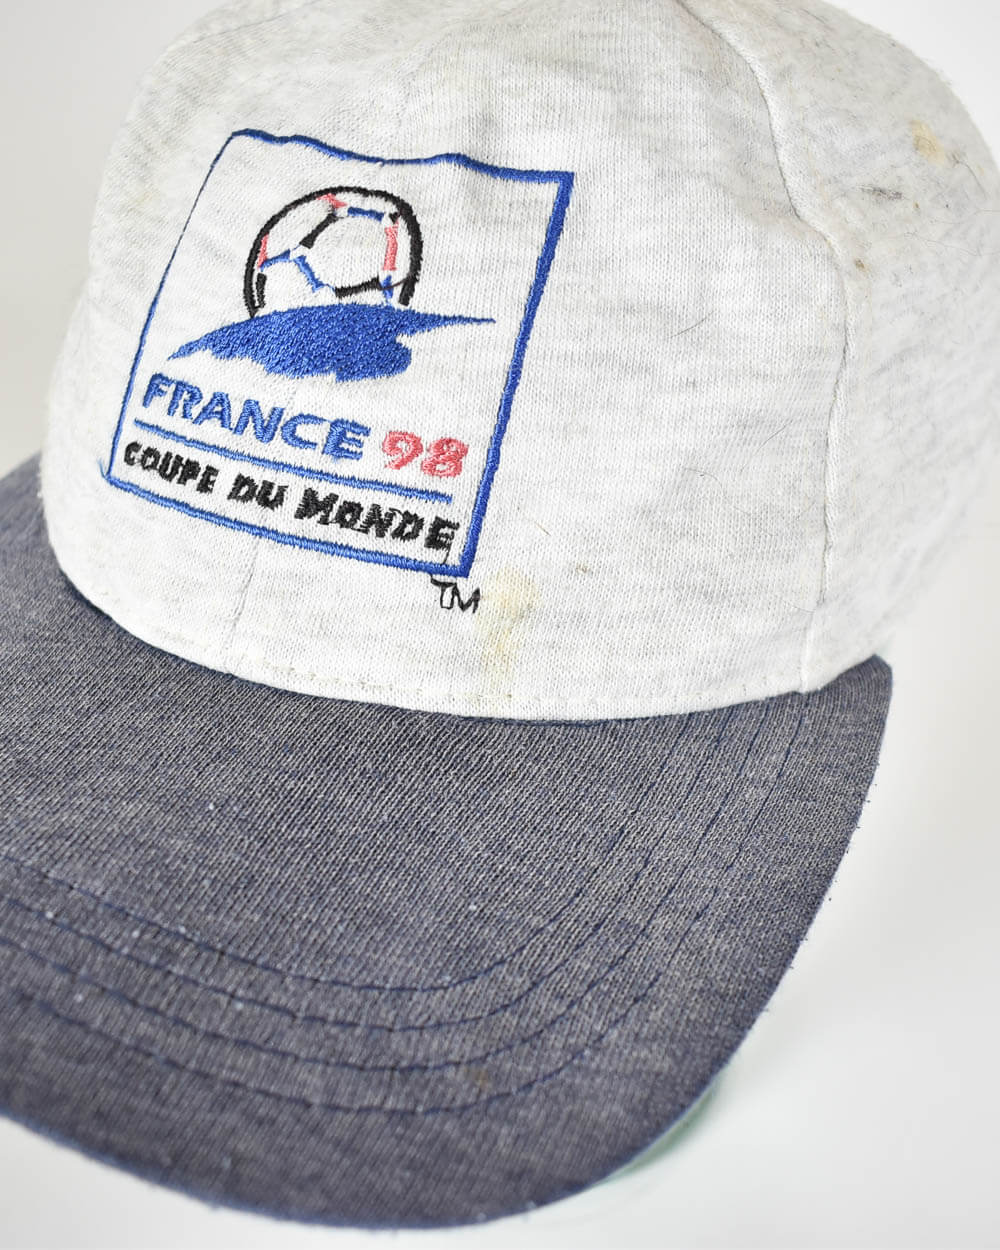 Stone France 98 World Cup Cap